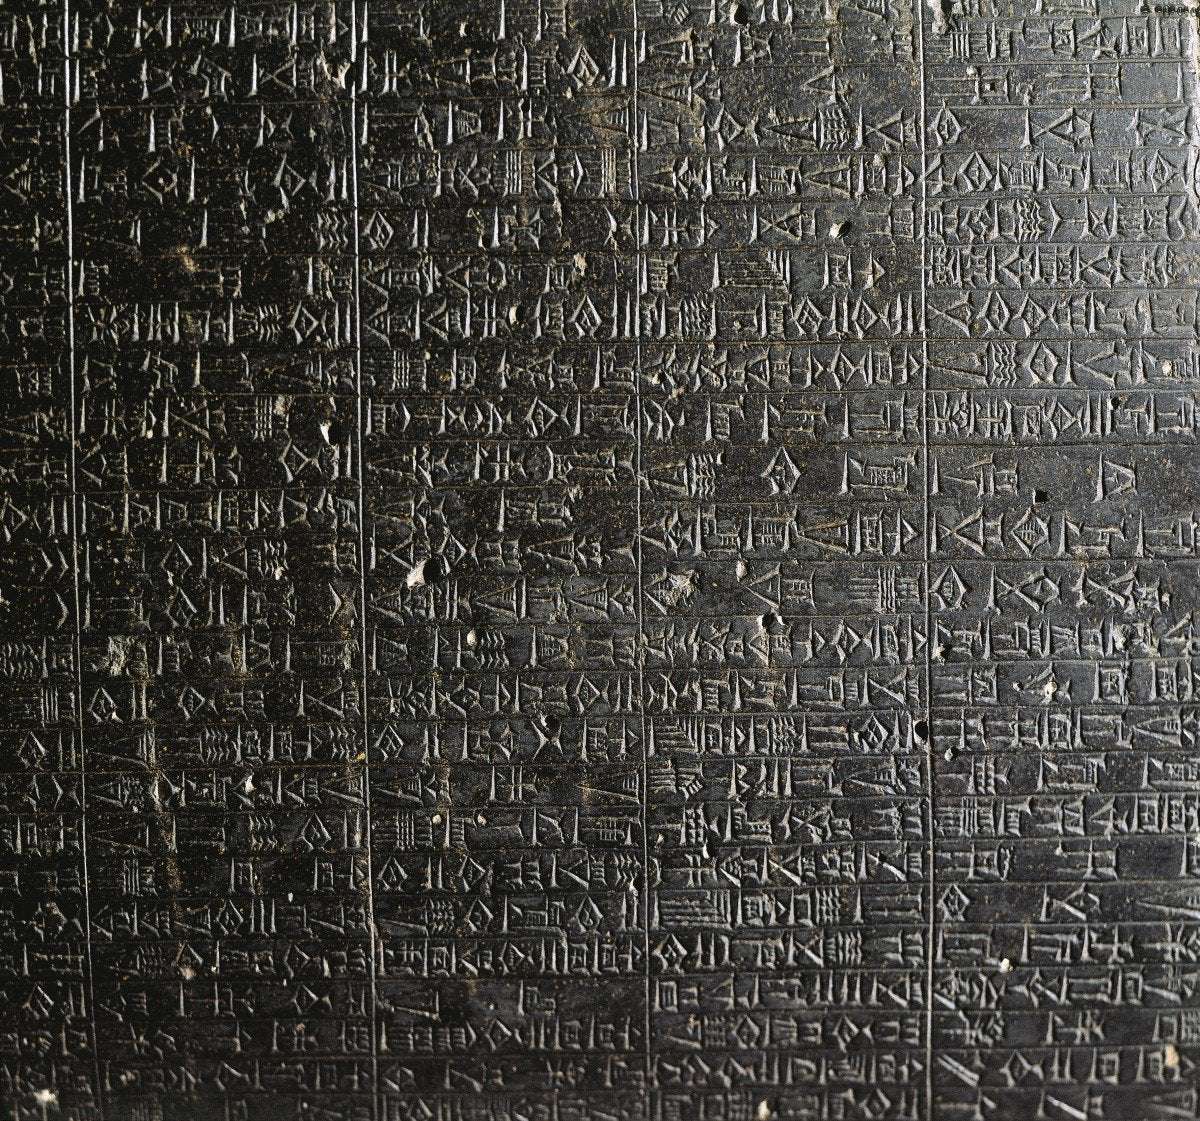 image for TIL that the Code of Hammurabi, while notorious for its eye for an eye punishments and the removal of body parts of the guilty party, was also one of the earliest pieces of written law to have it a requirement for an innocent person to be assumed innocent until proven guilty